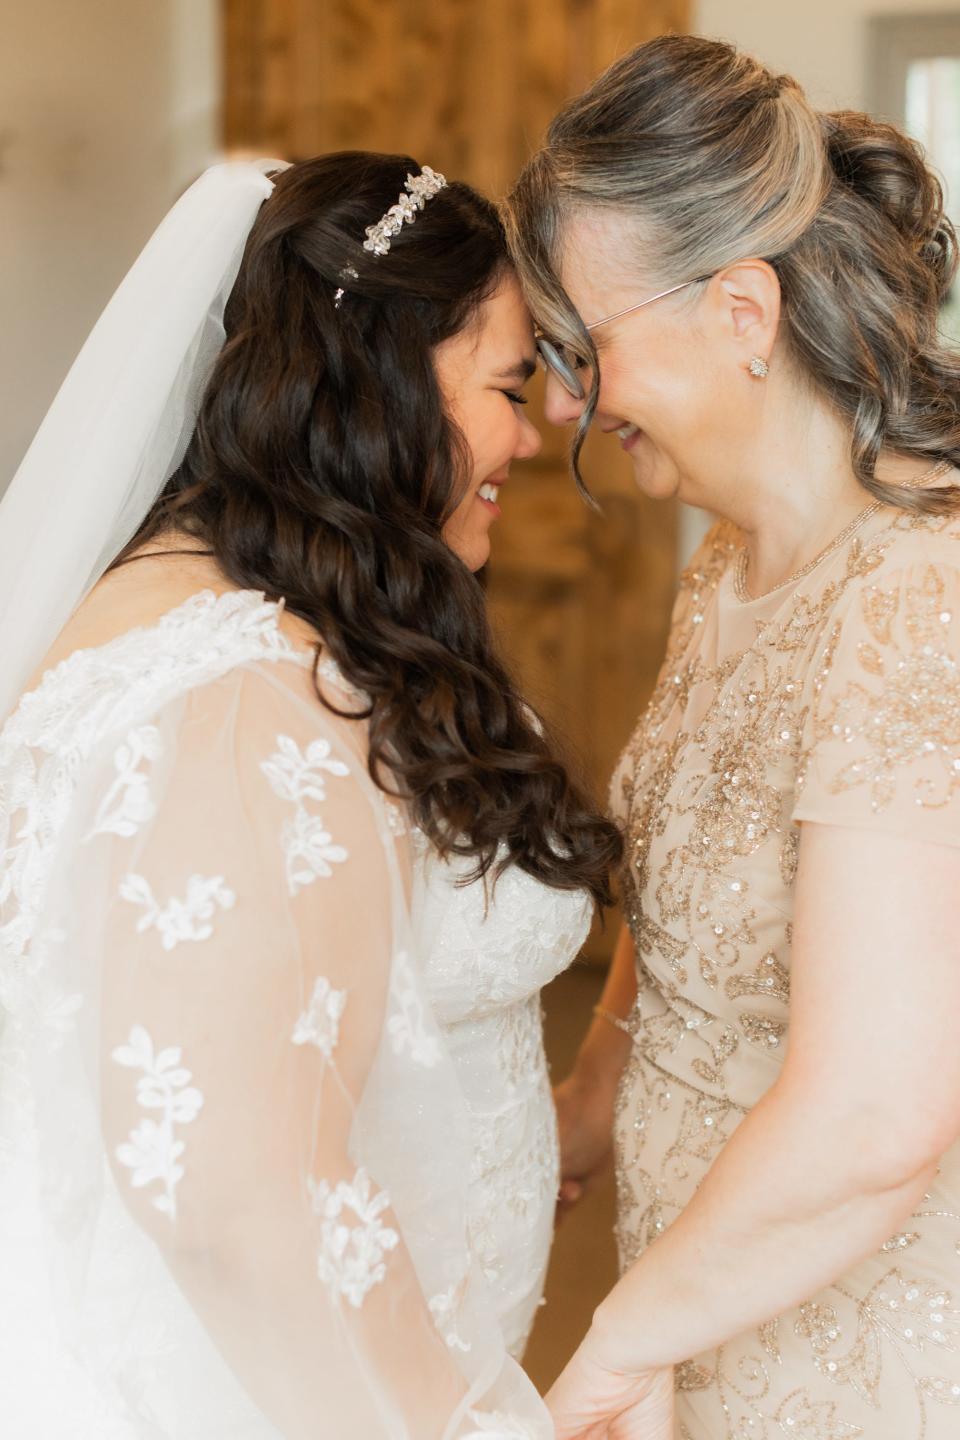 A bride and her mother lean their heads together.